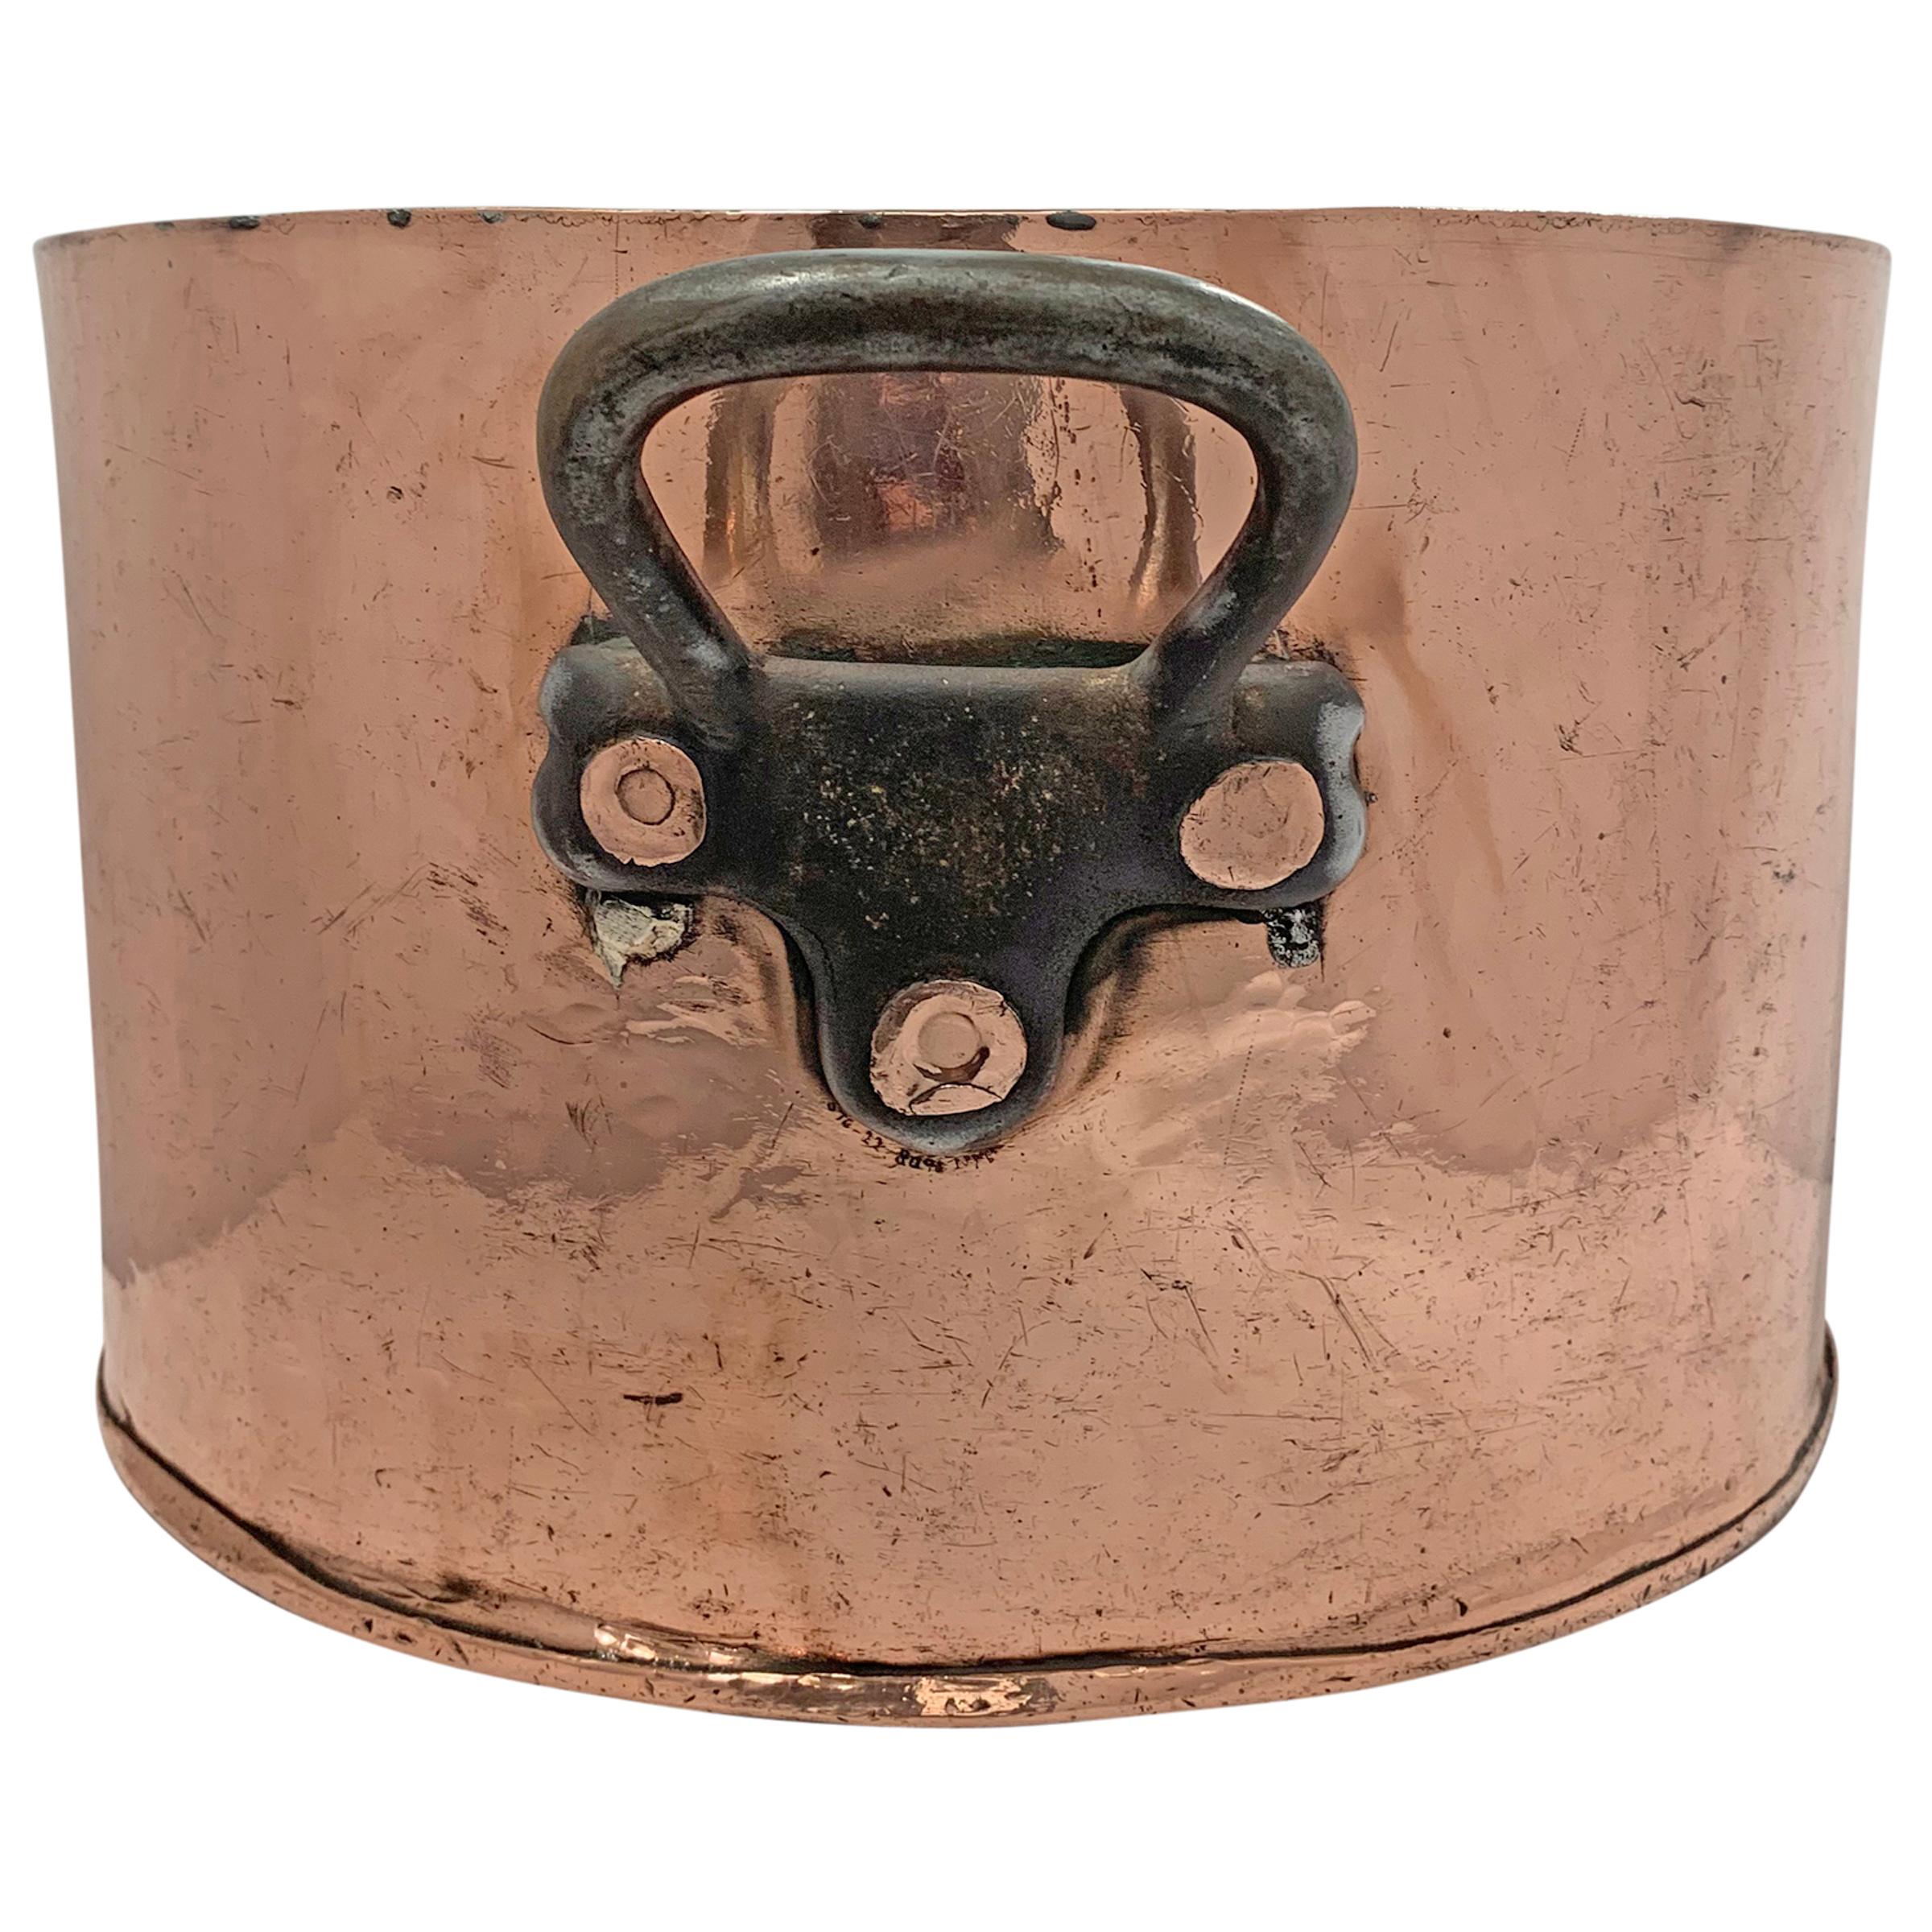 A grande early 20th century American 1.5 mm copper pot from the Hotel Taft, opened in 1926 at 152 West 51st Street in New York City. The pot has two iron handles and is marked 